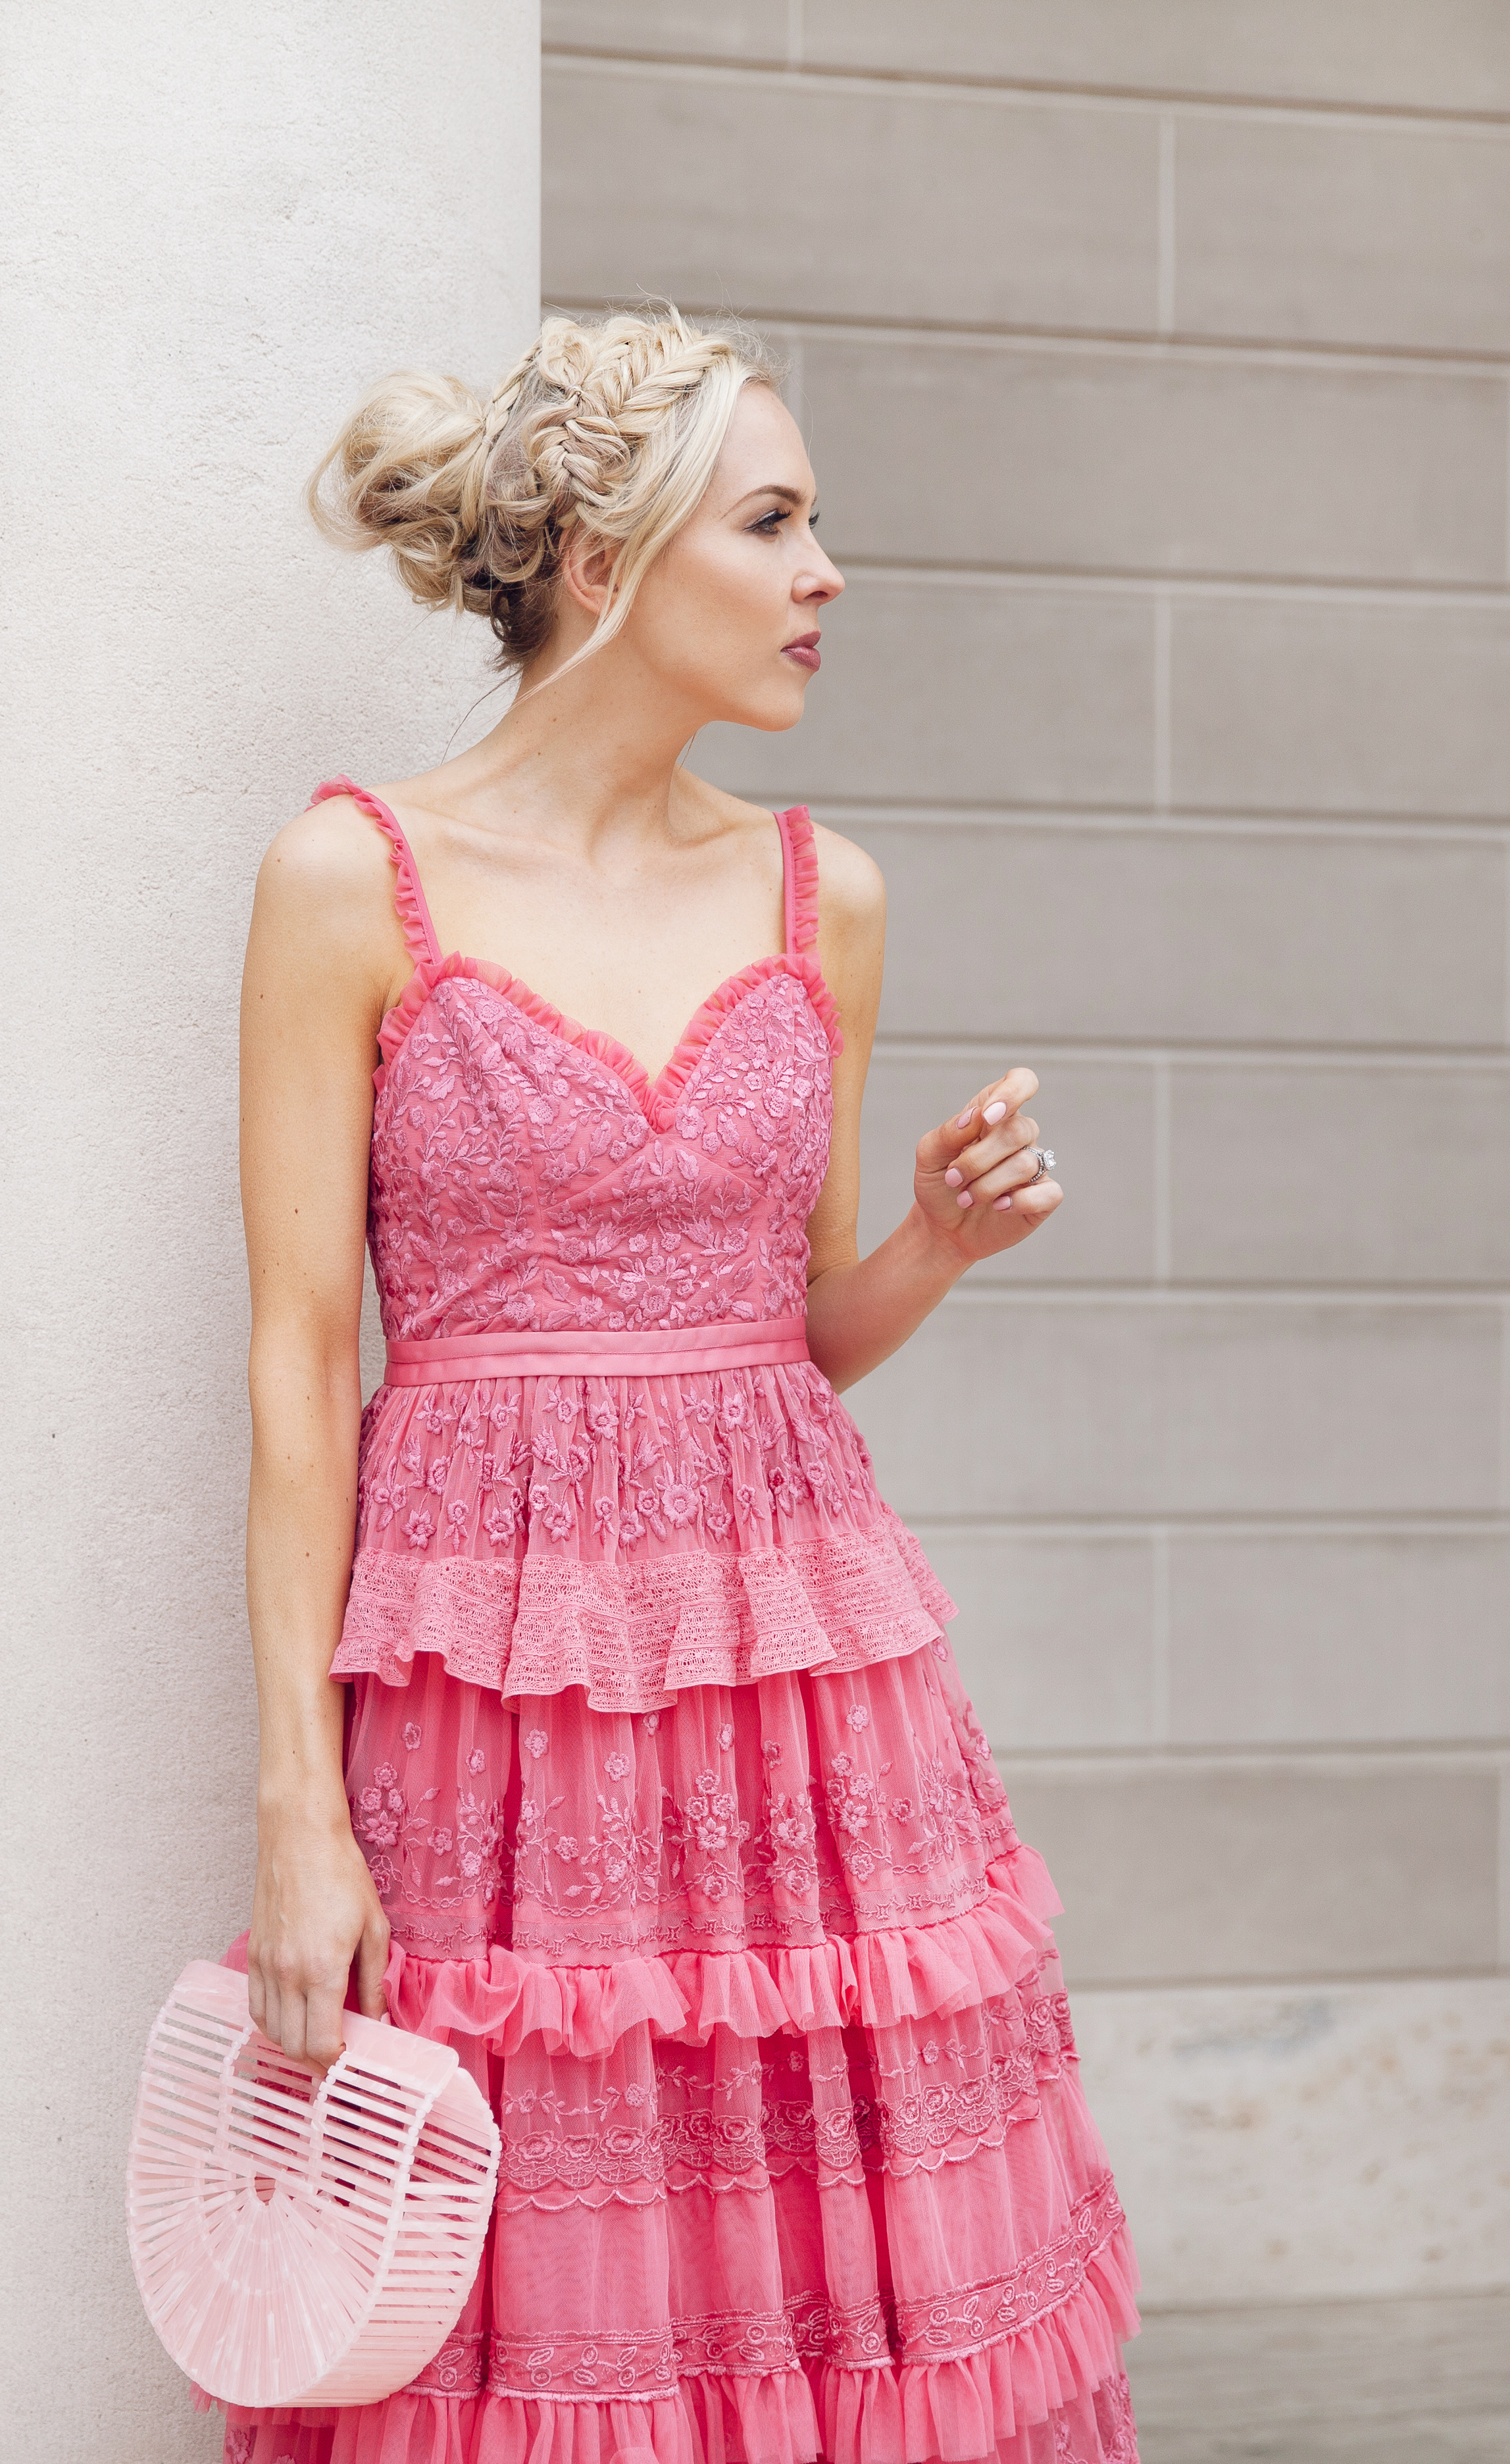 how to eBay, my style journey, needle & thread dress maxi pink embroidered | Top San Francisco fashion blog, Lombard and Fifth, features her tips on How to Ebay effectively: image of a blonde woman wearing a stunning maxi dress found on Ebay